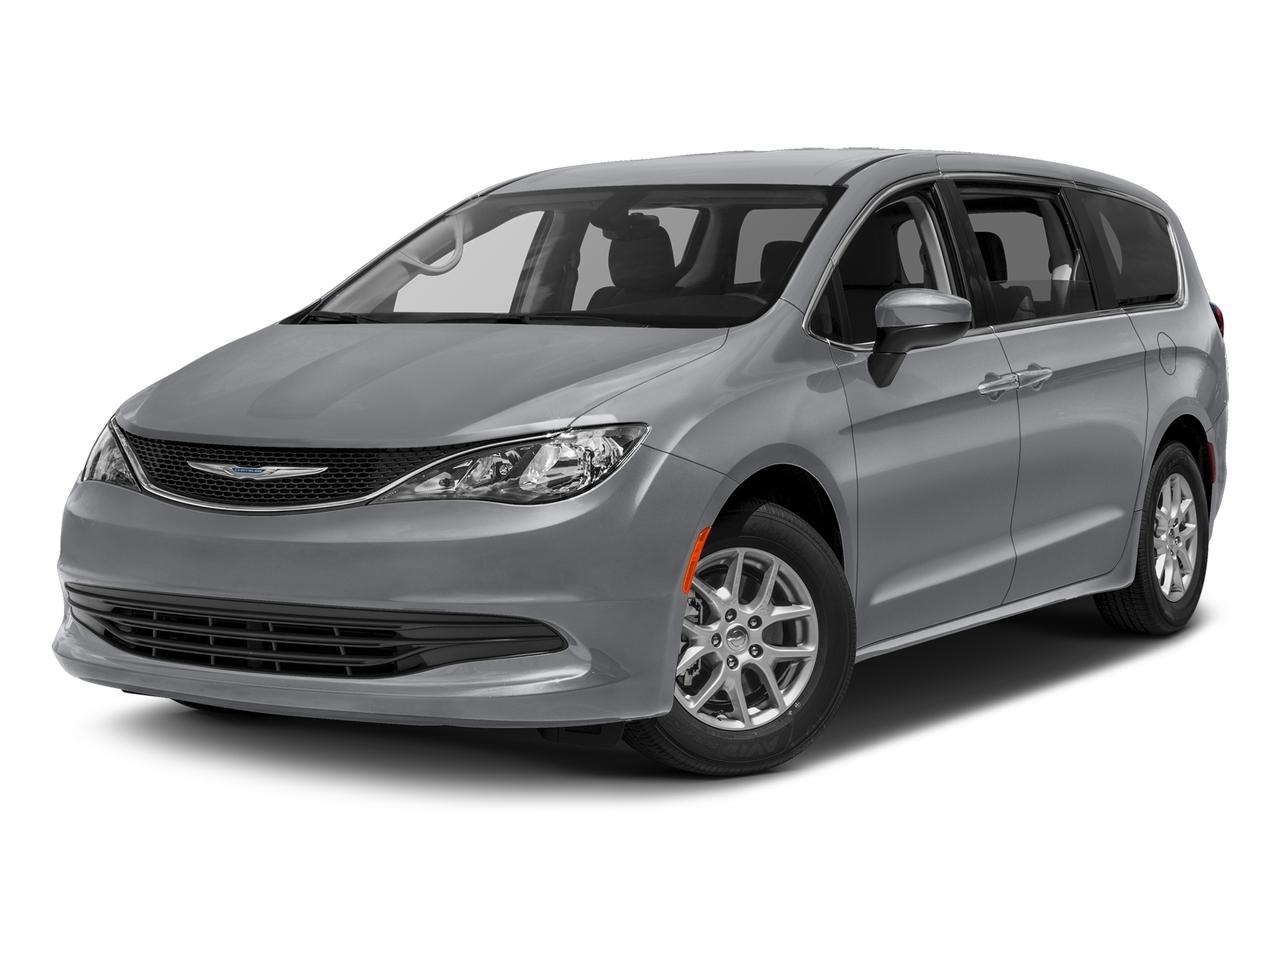 2017 Chrysler Pacifica Vehicle Photo in MEDINA, OH 44256-9631